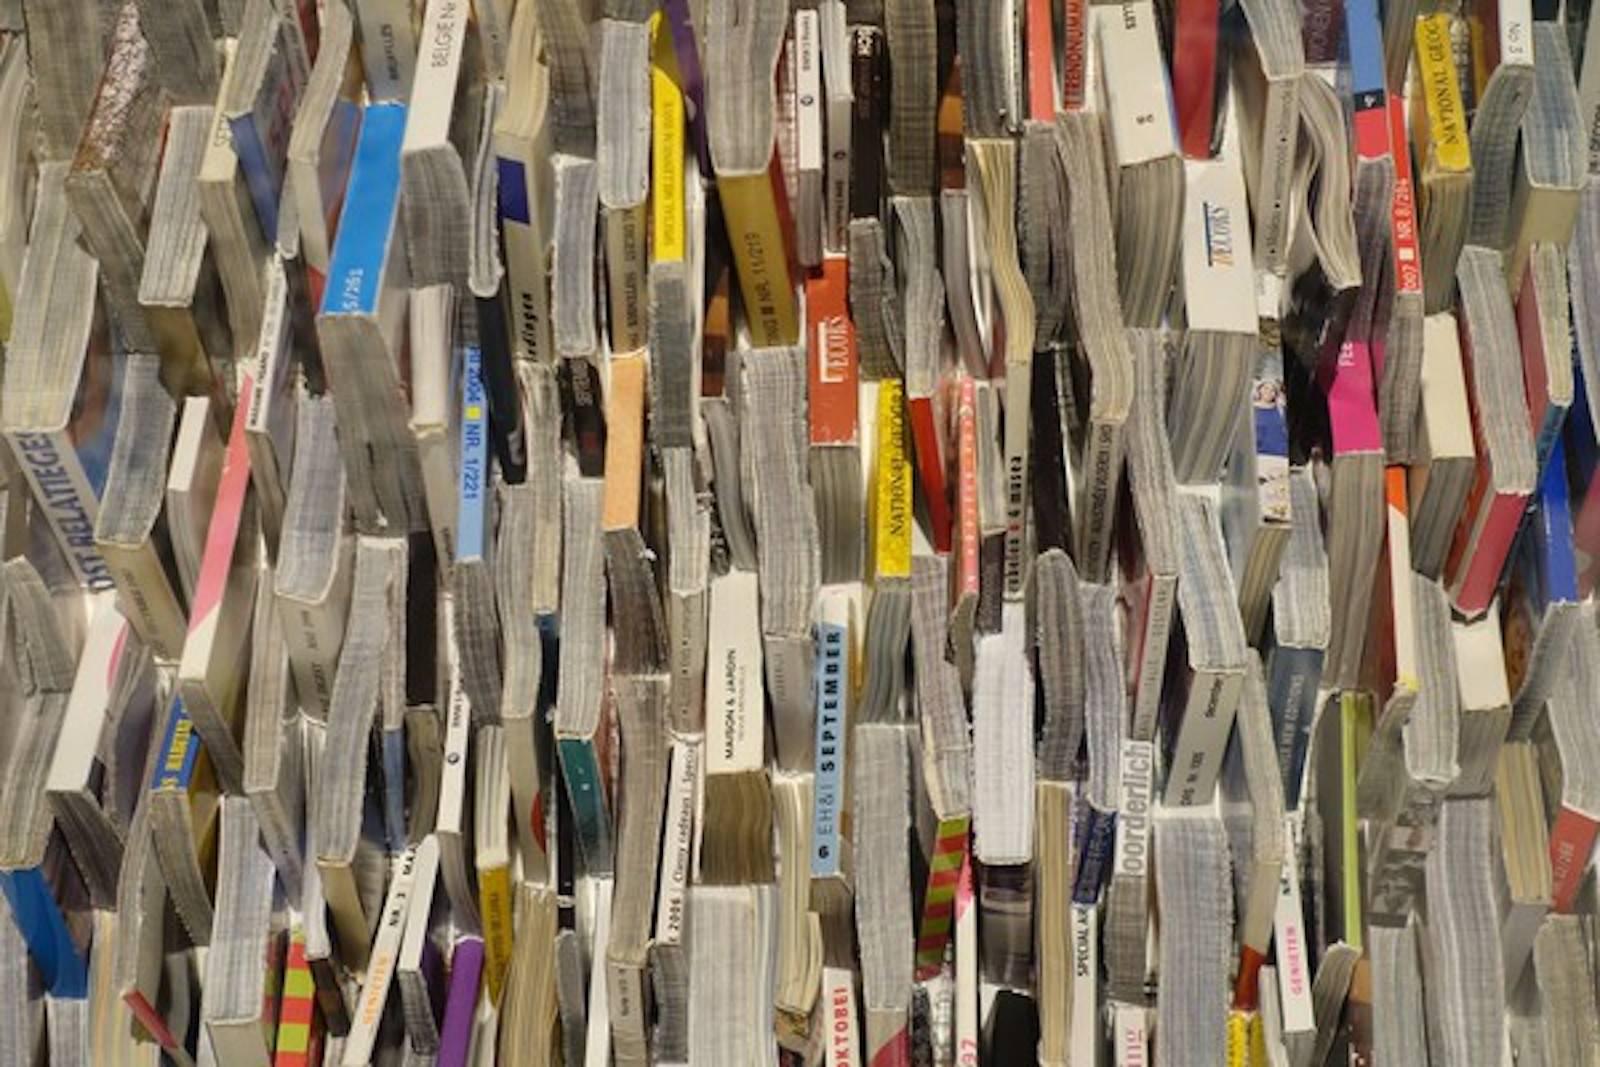 Paper art wall sculpture.
Actual hand folded magazines cut into horizontal triangular pieces and stacked and placed within Lucite box.
Another (P1012) is the same but pieces are placed horizontally.
When hung together they make a very strong and